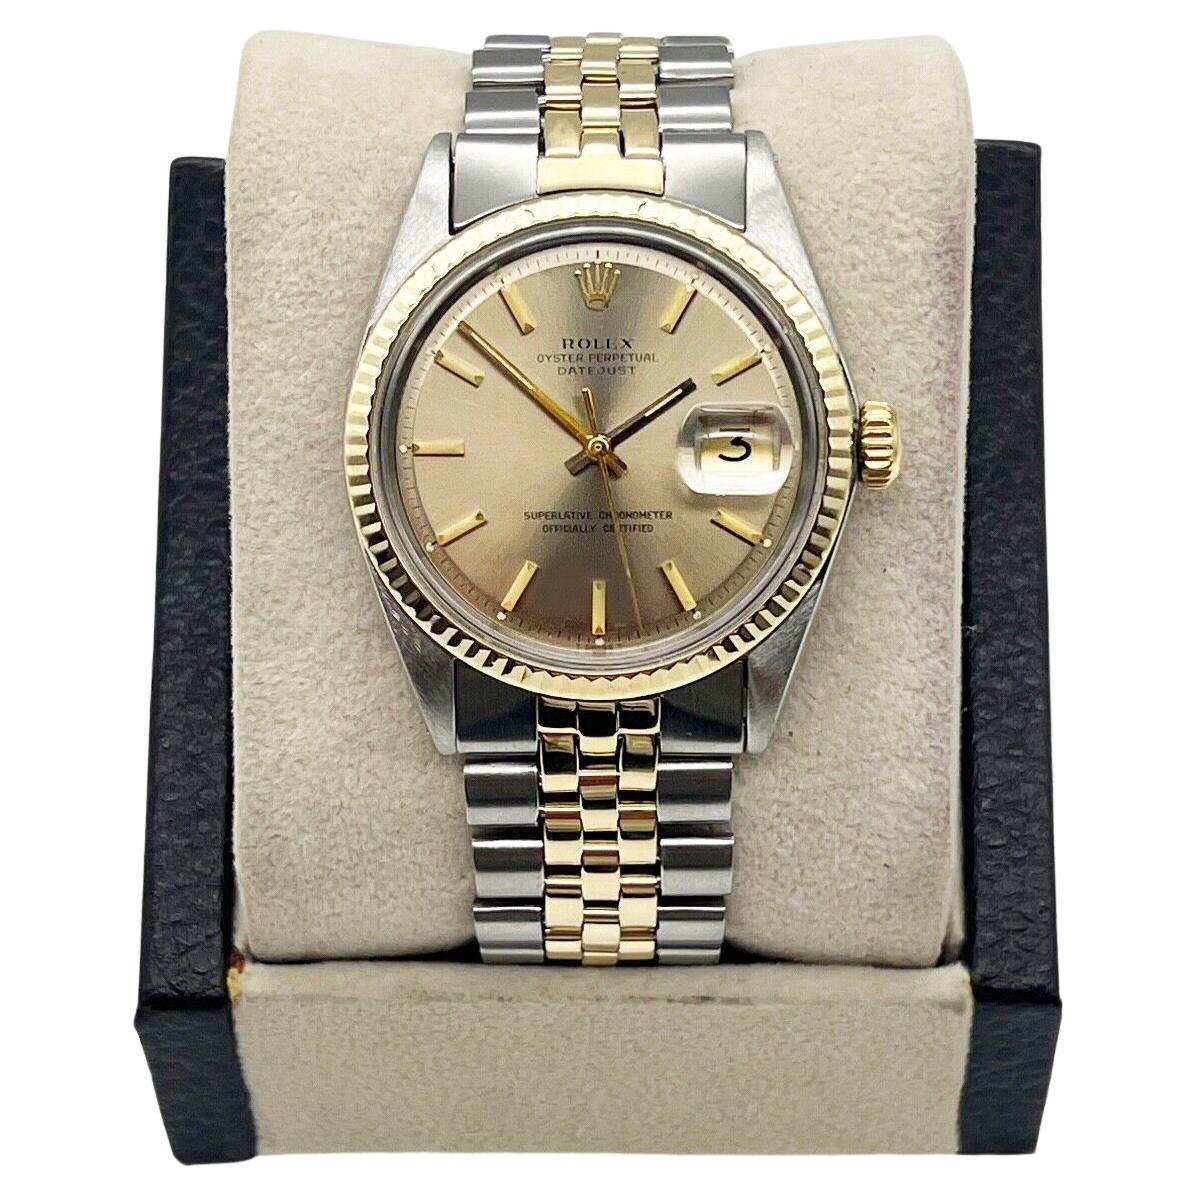 Rolex 1601 Datejust Pie Pan Dial 14K Yellow Gold Stainless Steel